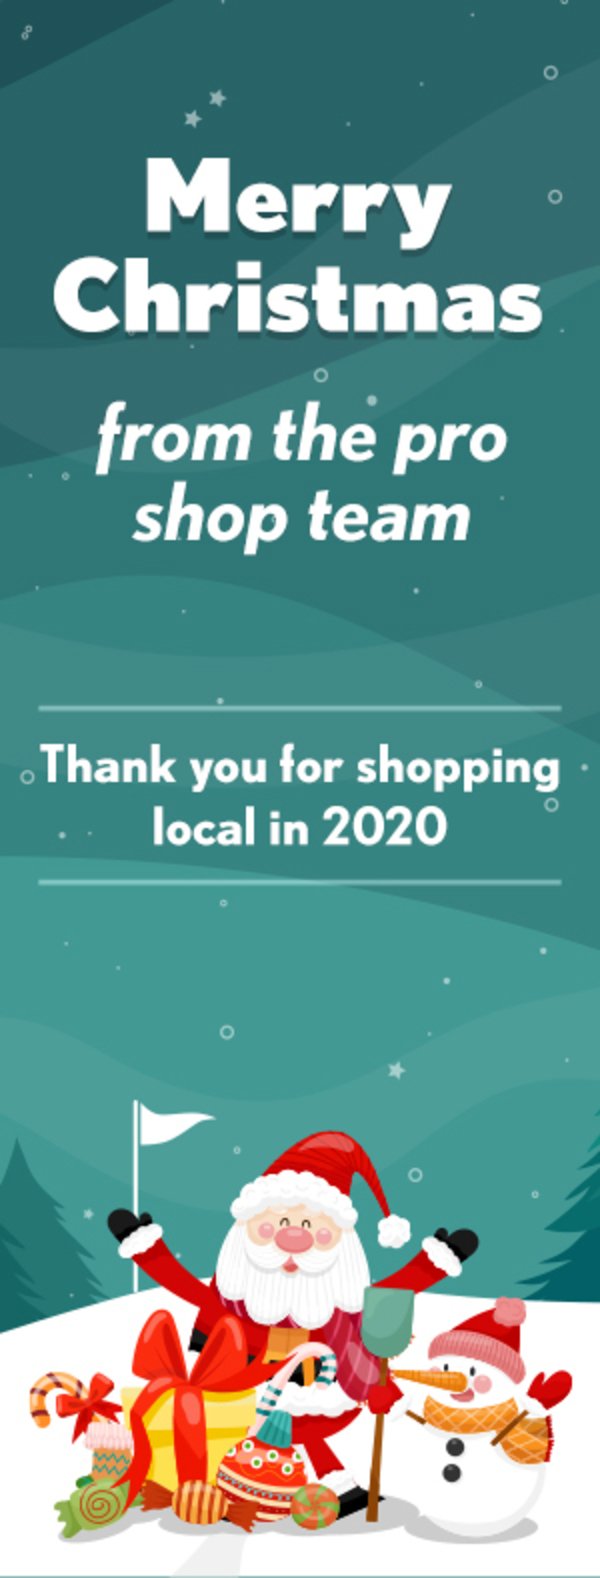 Merry Christmas - thank you for shopping local in 2020